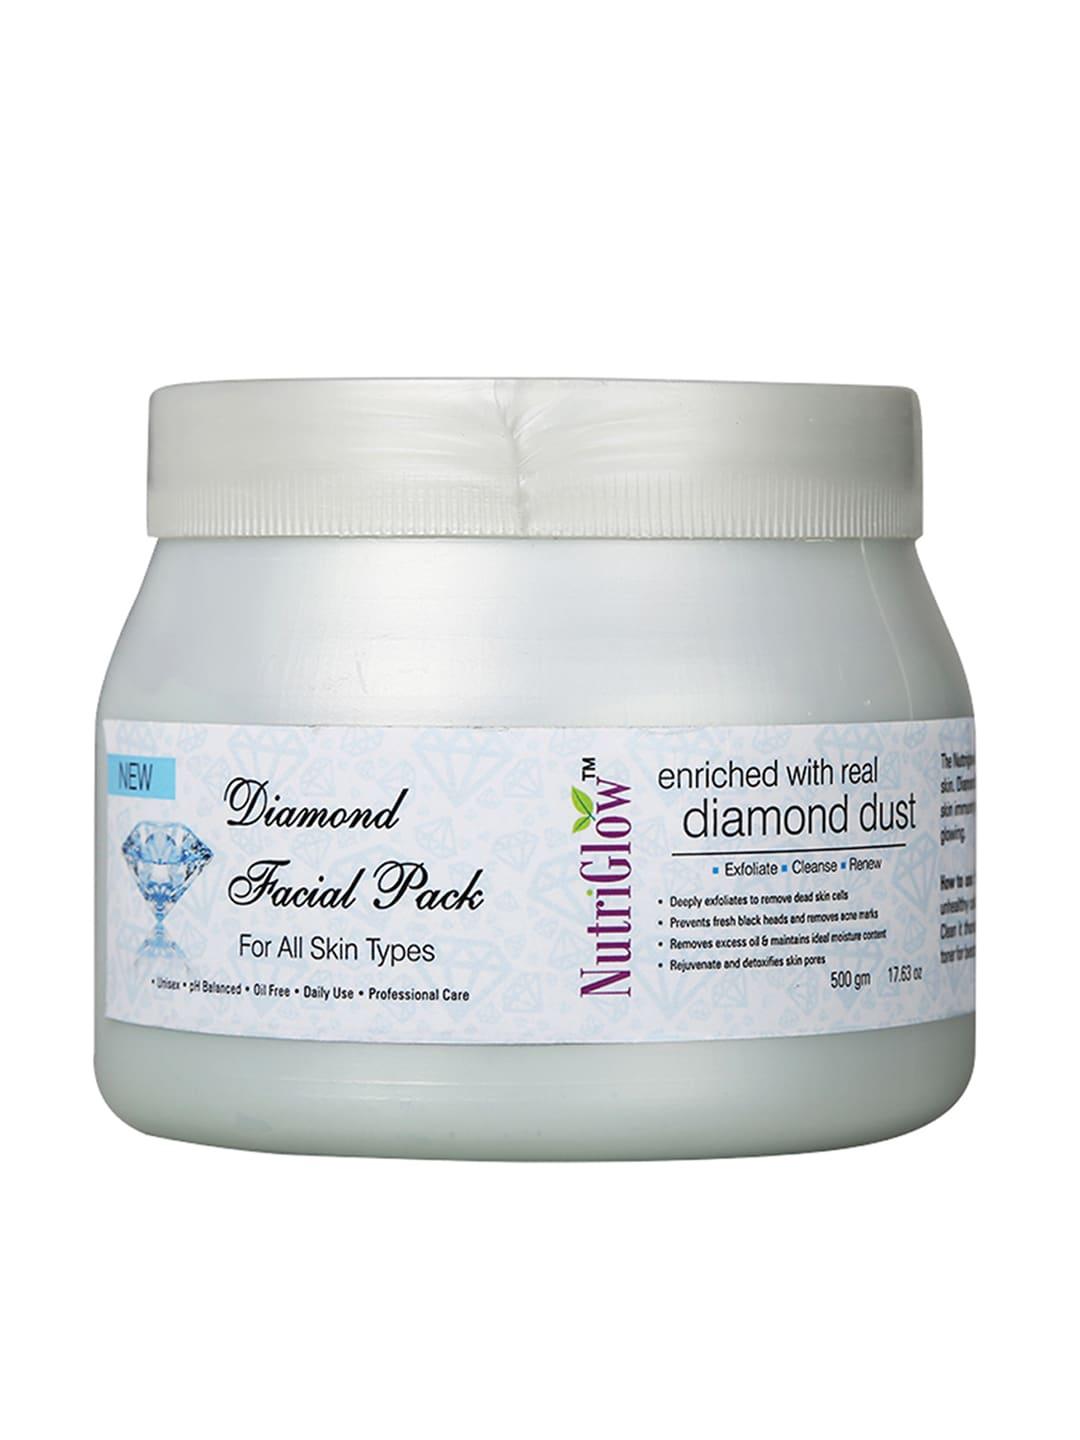 NutriGlow Diamond Facial Pack Enriched With Real Diamond Dust 500 g